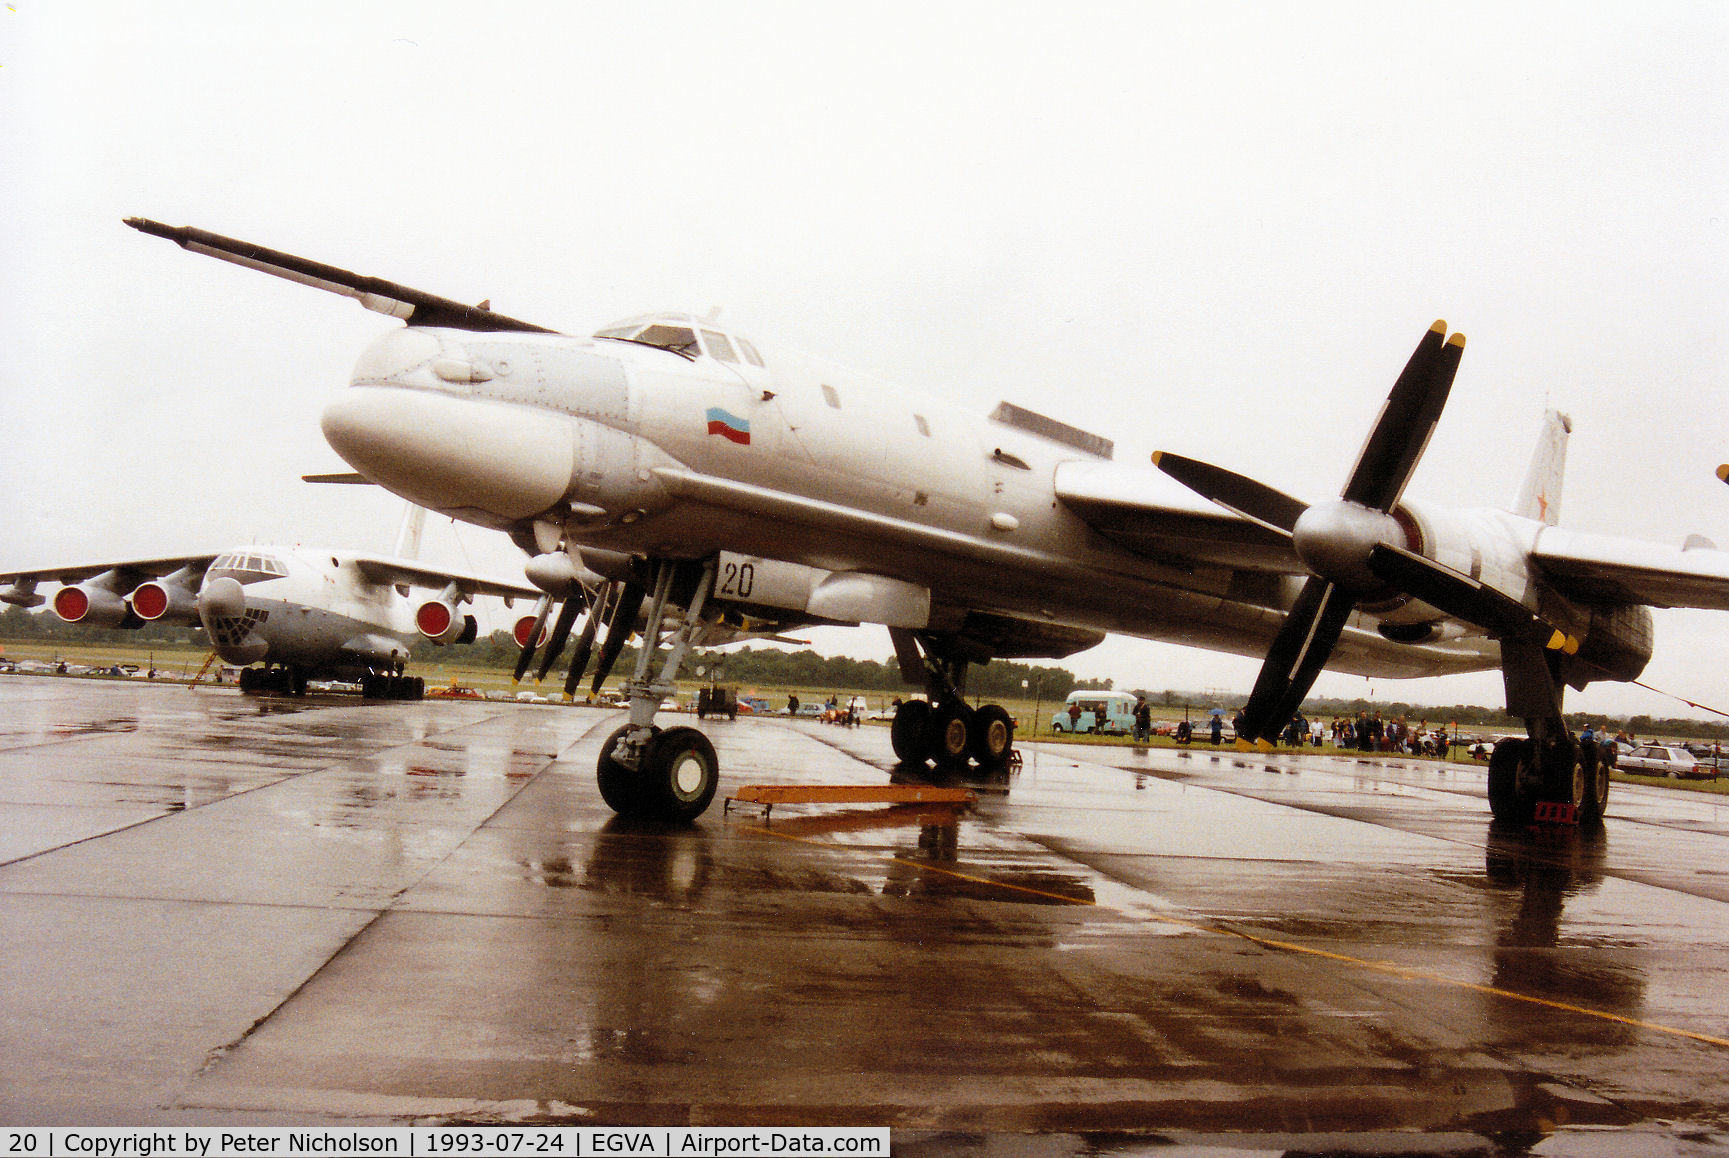 20, Tupolev Tu-95MS C/N 34108, Tu-95MS Bear H of 182nd Heavy Bomber Regiment at Mosdok Airbase on display at the 1993 Intnl Air Tattoo at RAF Fairford.